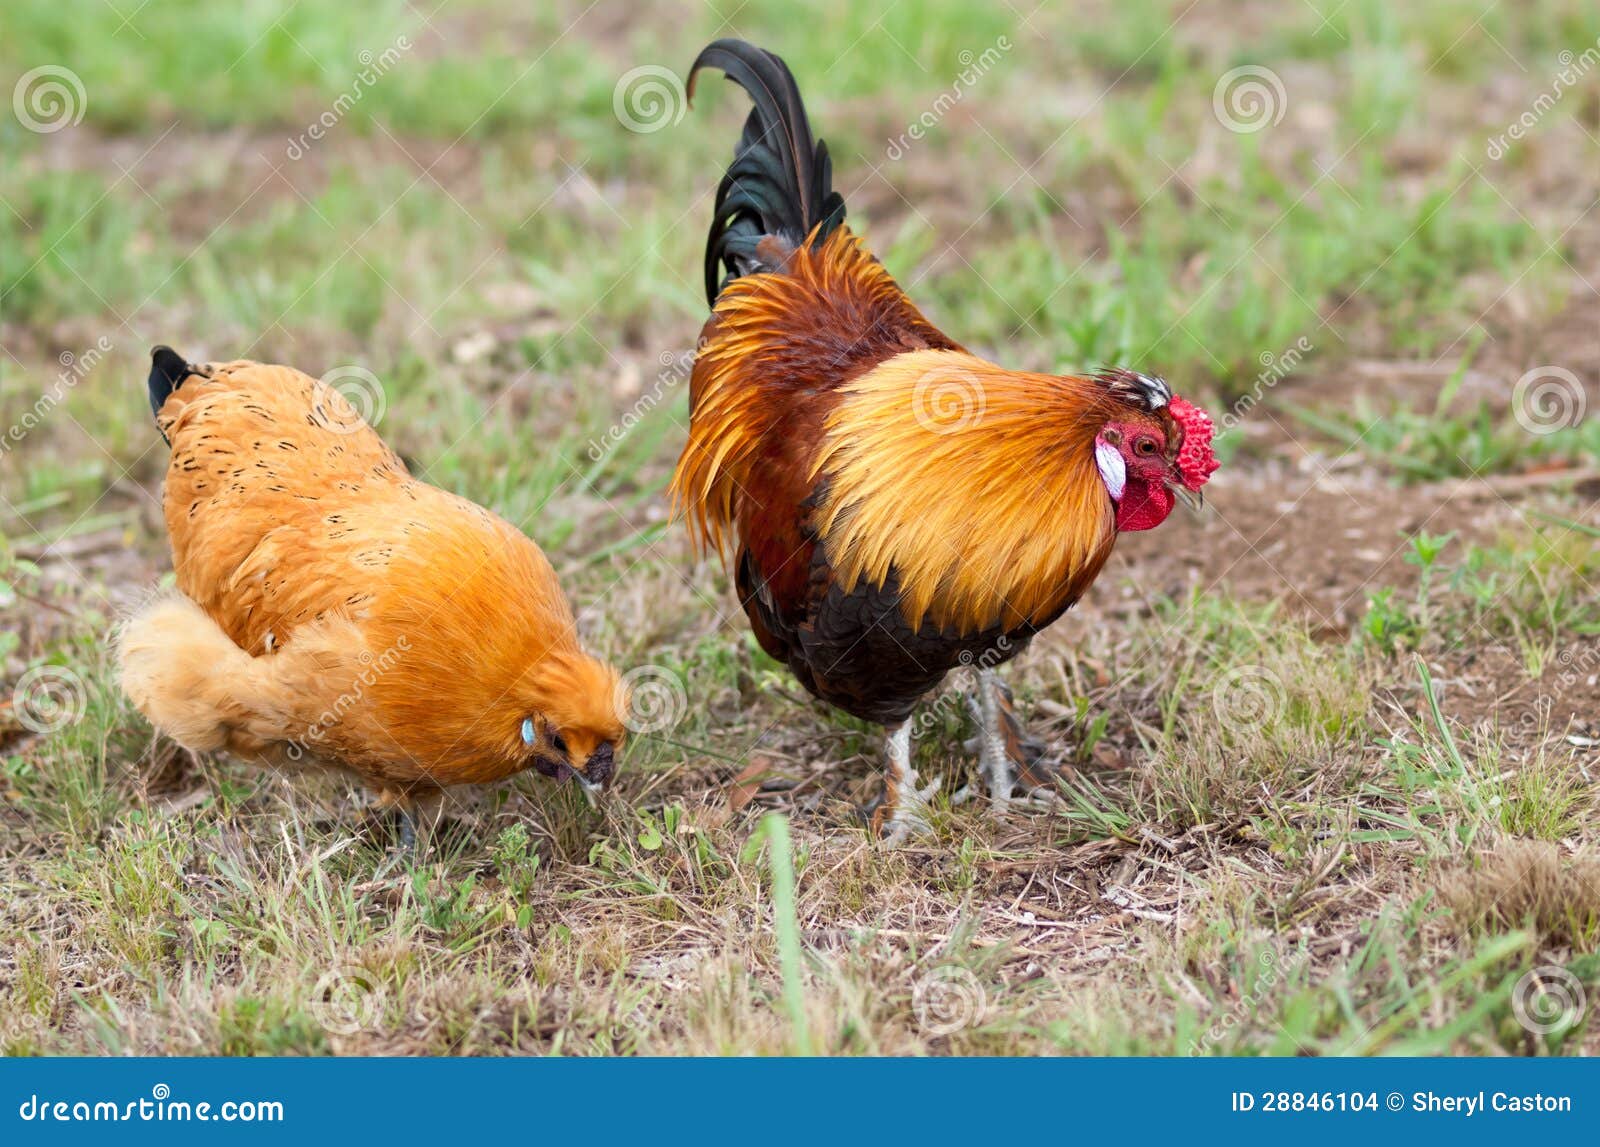 pair of two bantam chickens forage for food